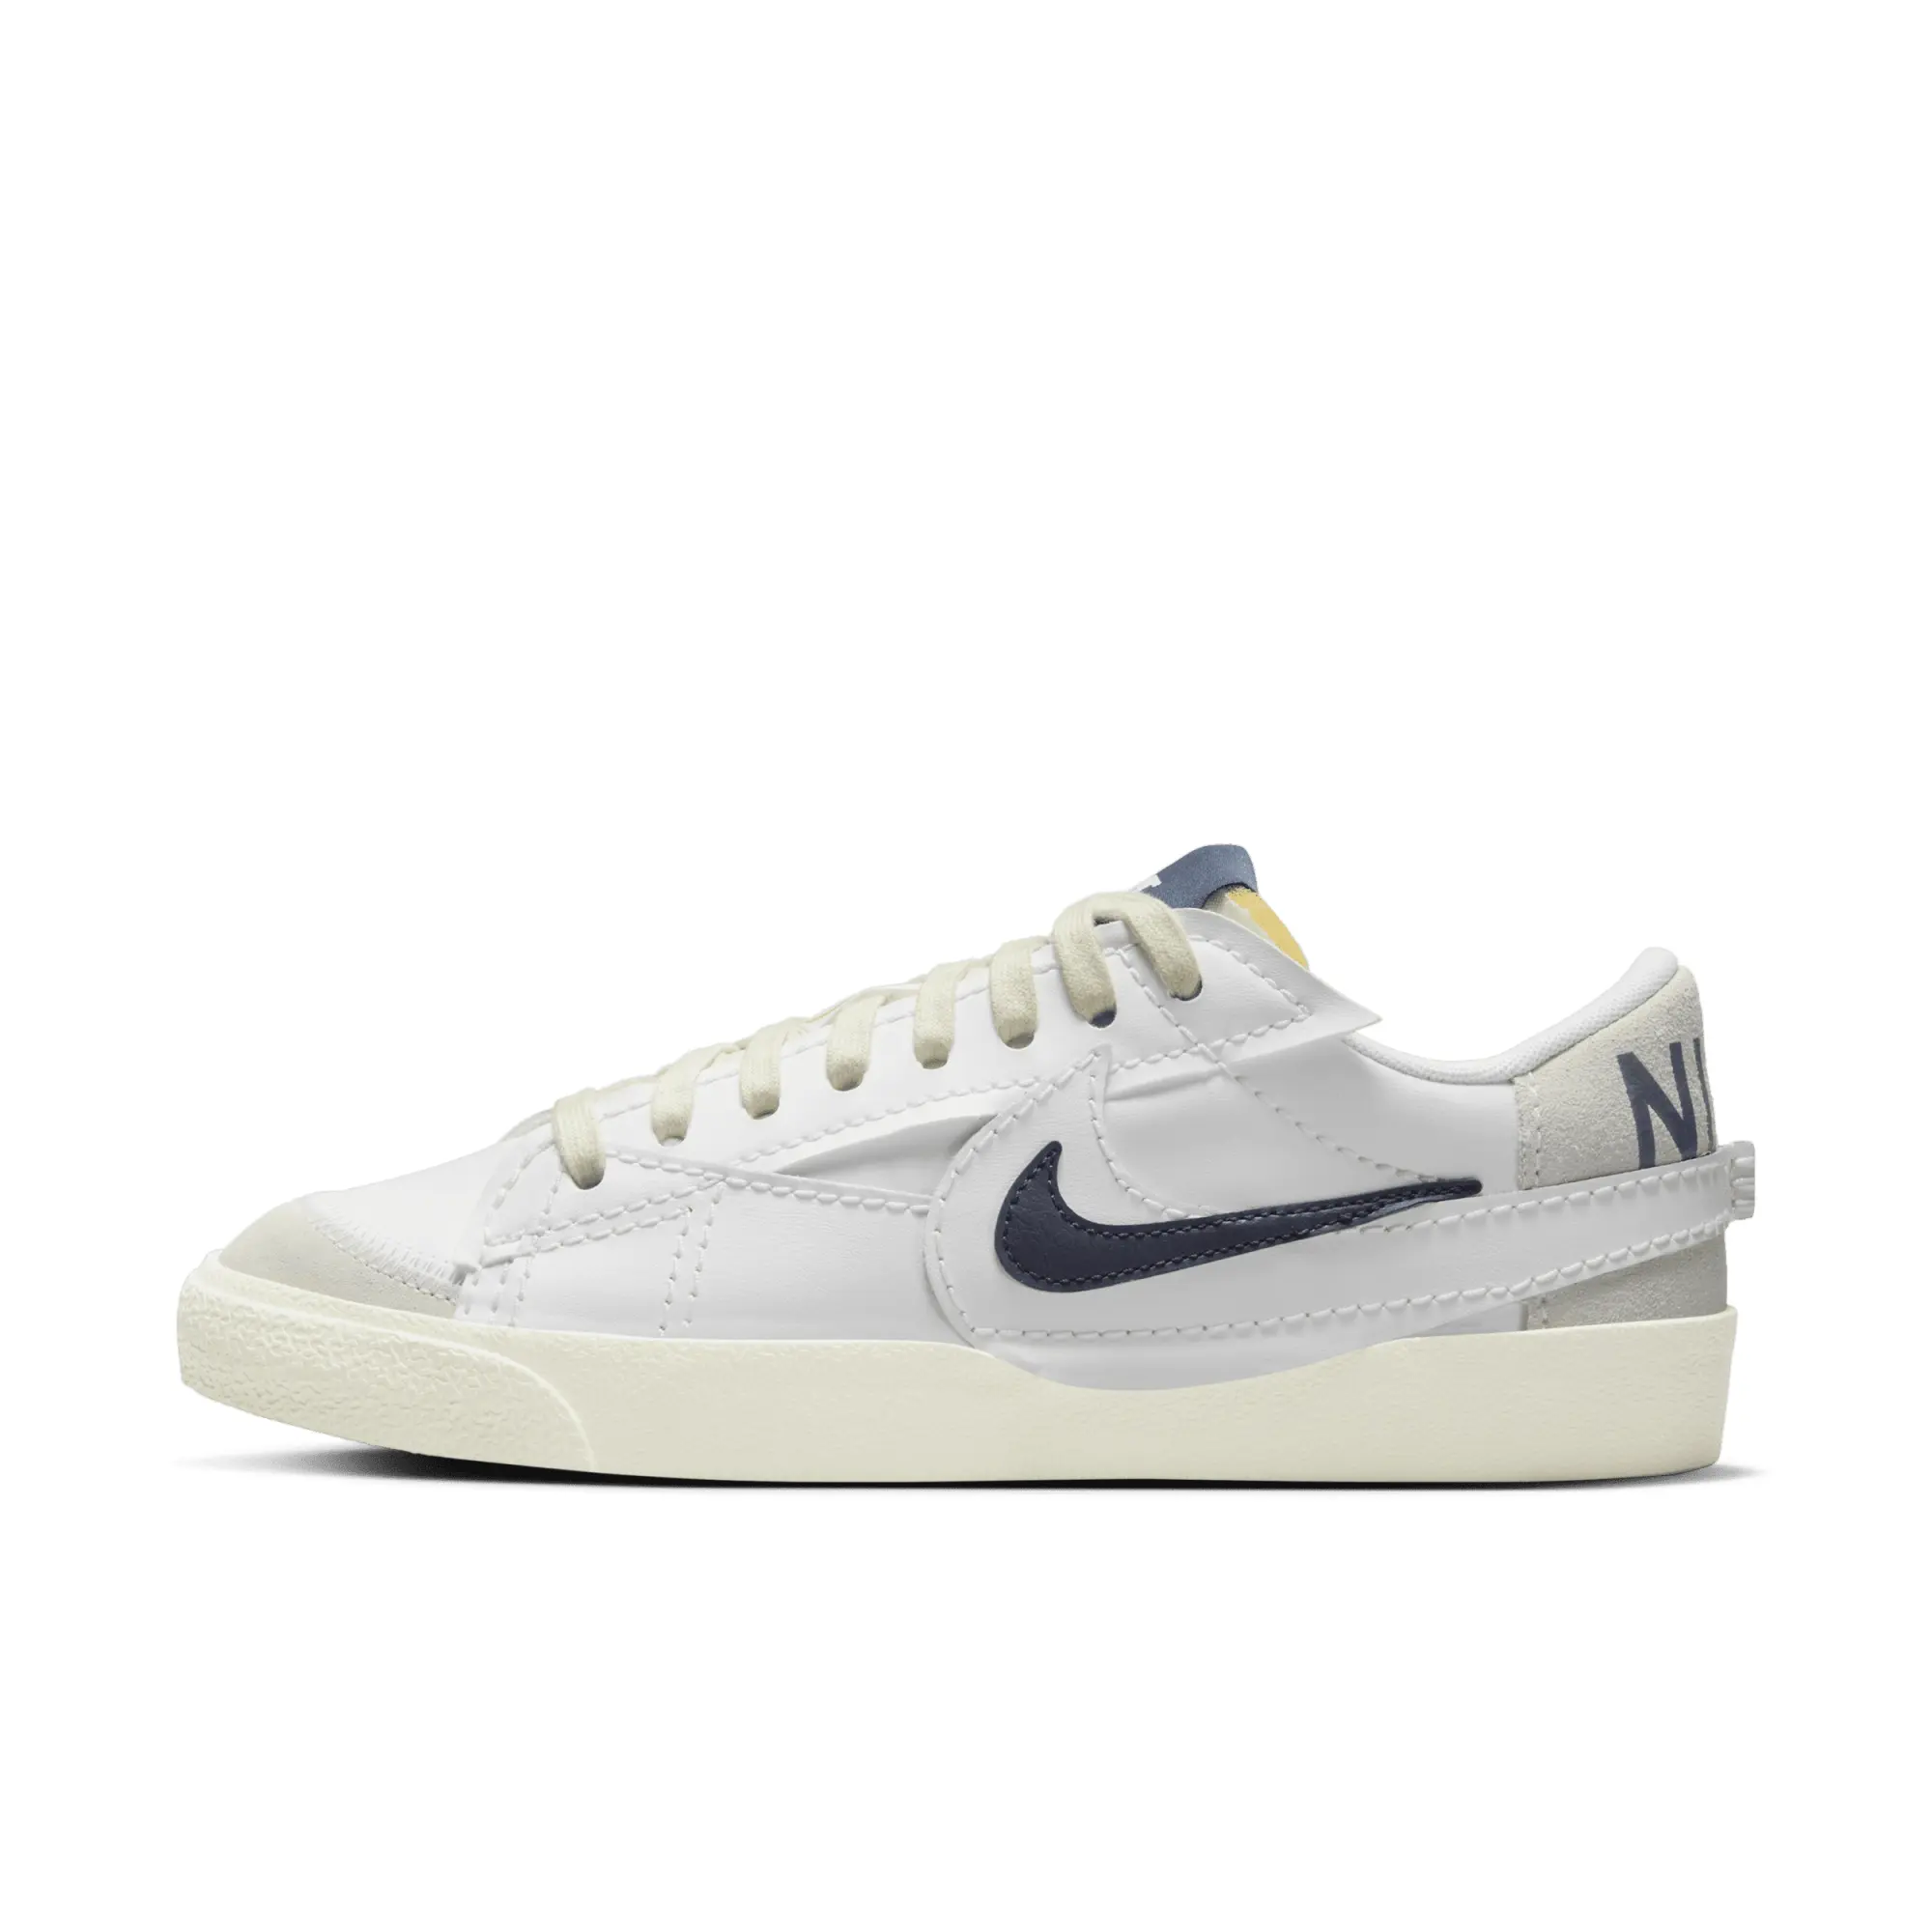 Nike Blazer '77 Jumbo Low Trainers With Double Swoosh In White And Navy